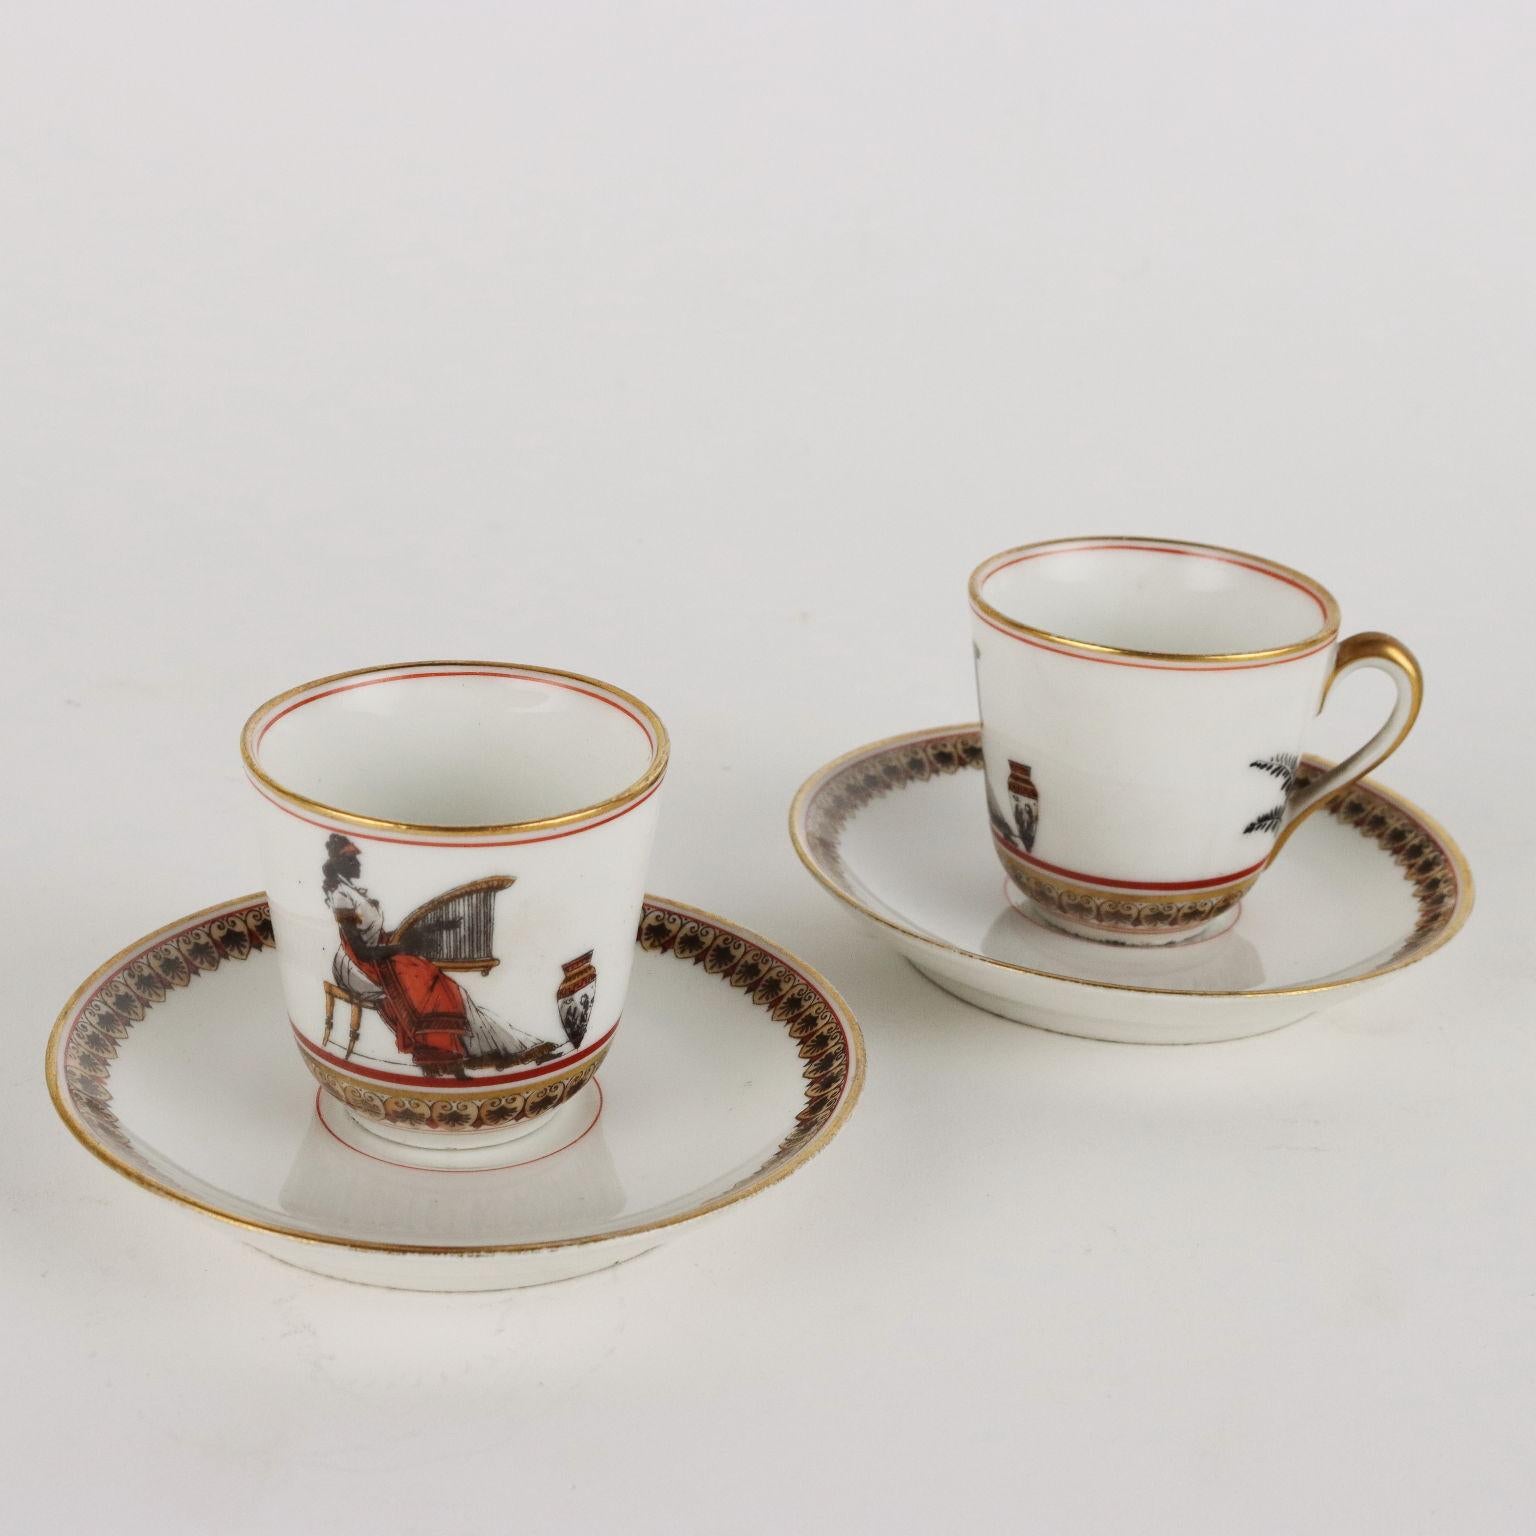 Late 19th Century Tete a Tete service in Porcelain by Ginori - Italy ca. 1880. For Sale